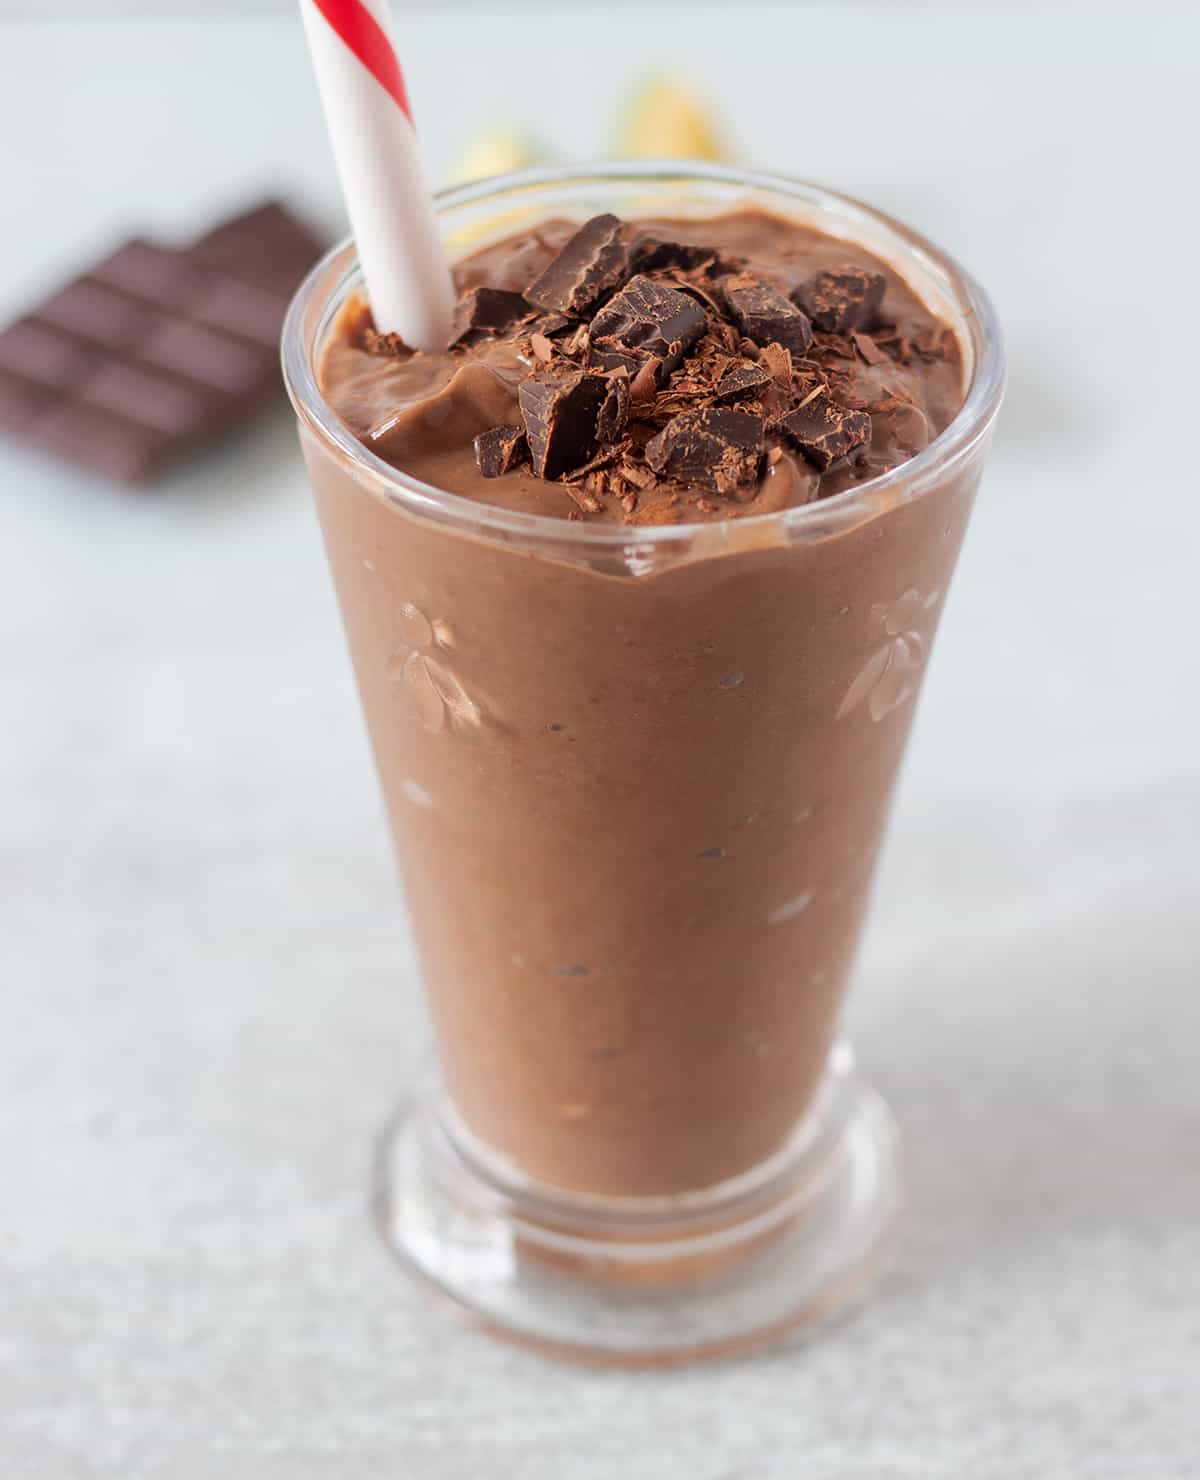 chocolate avocado smoothie in a clear glass topped with chopped chocolate and a red and white straw in the glass for serving.